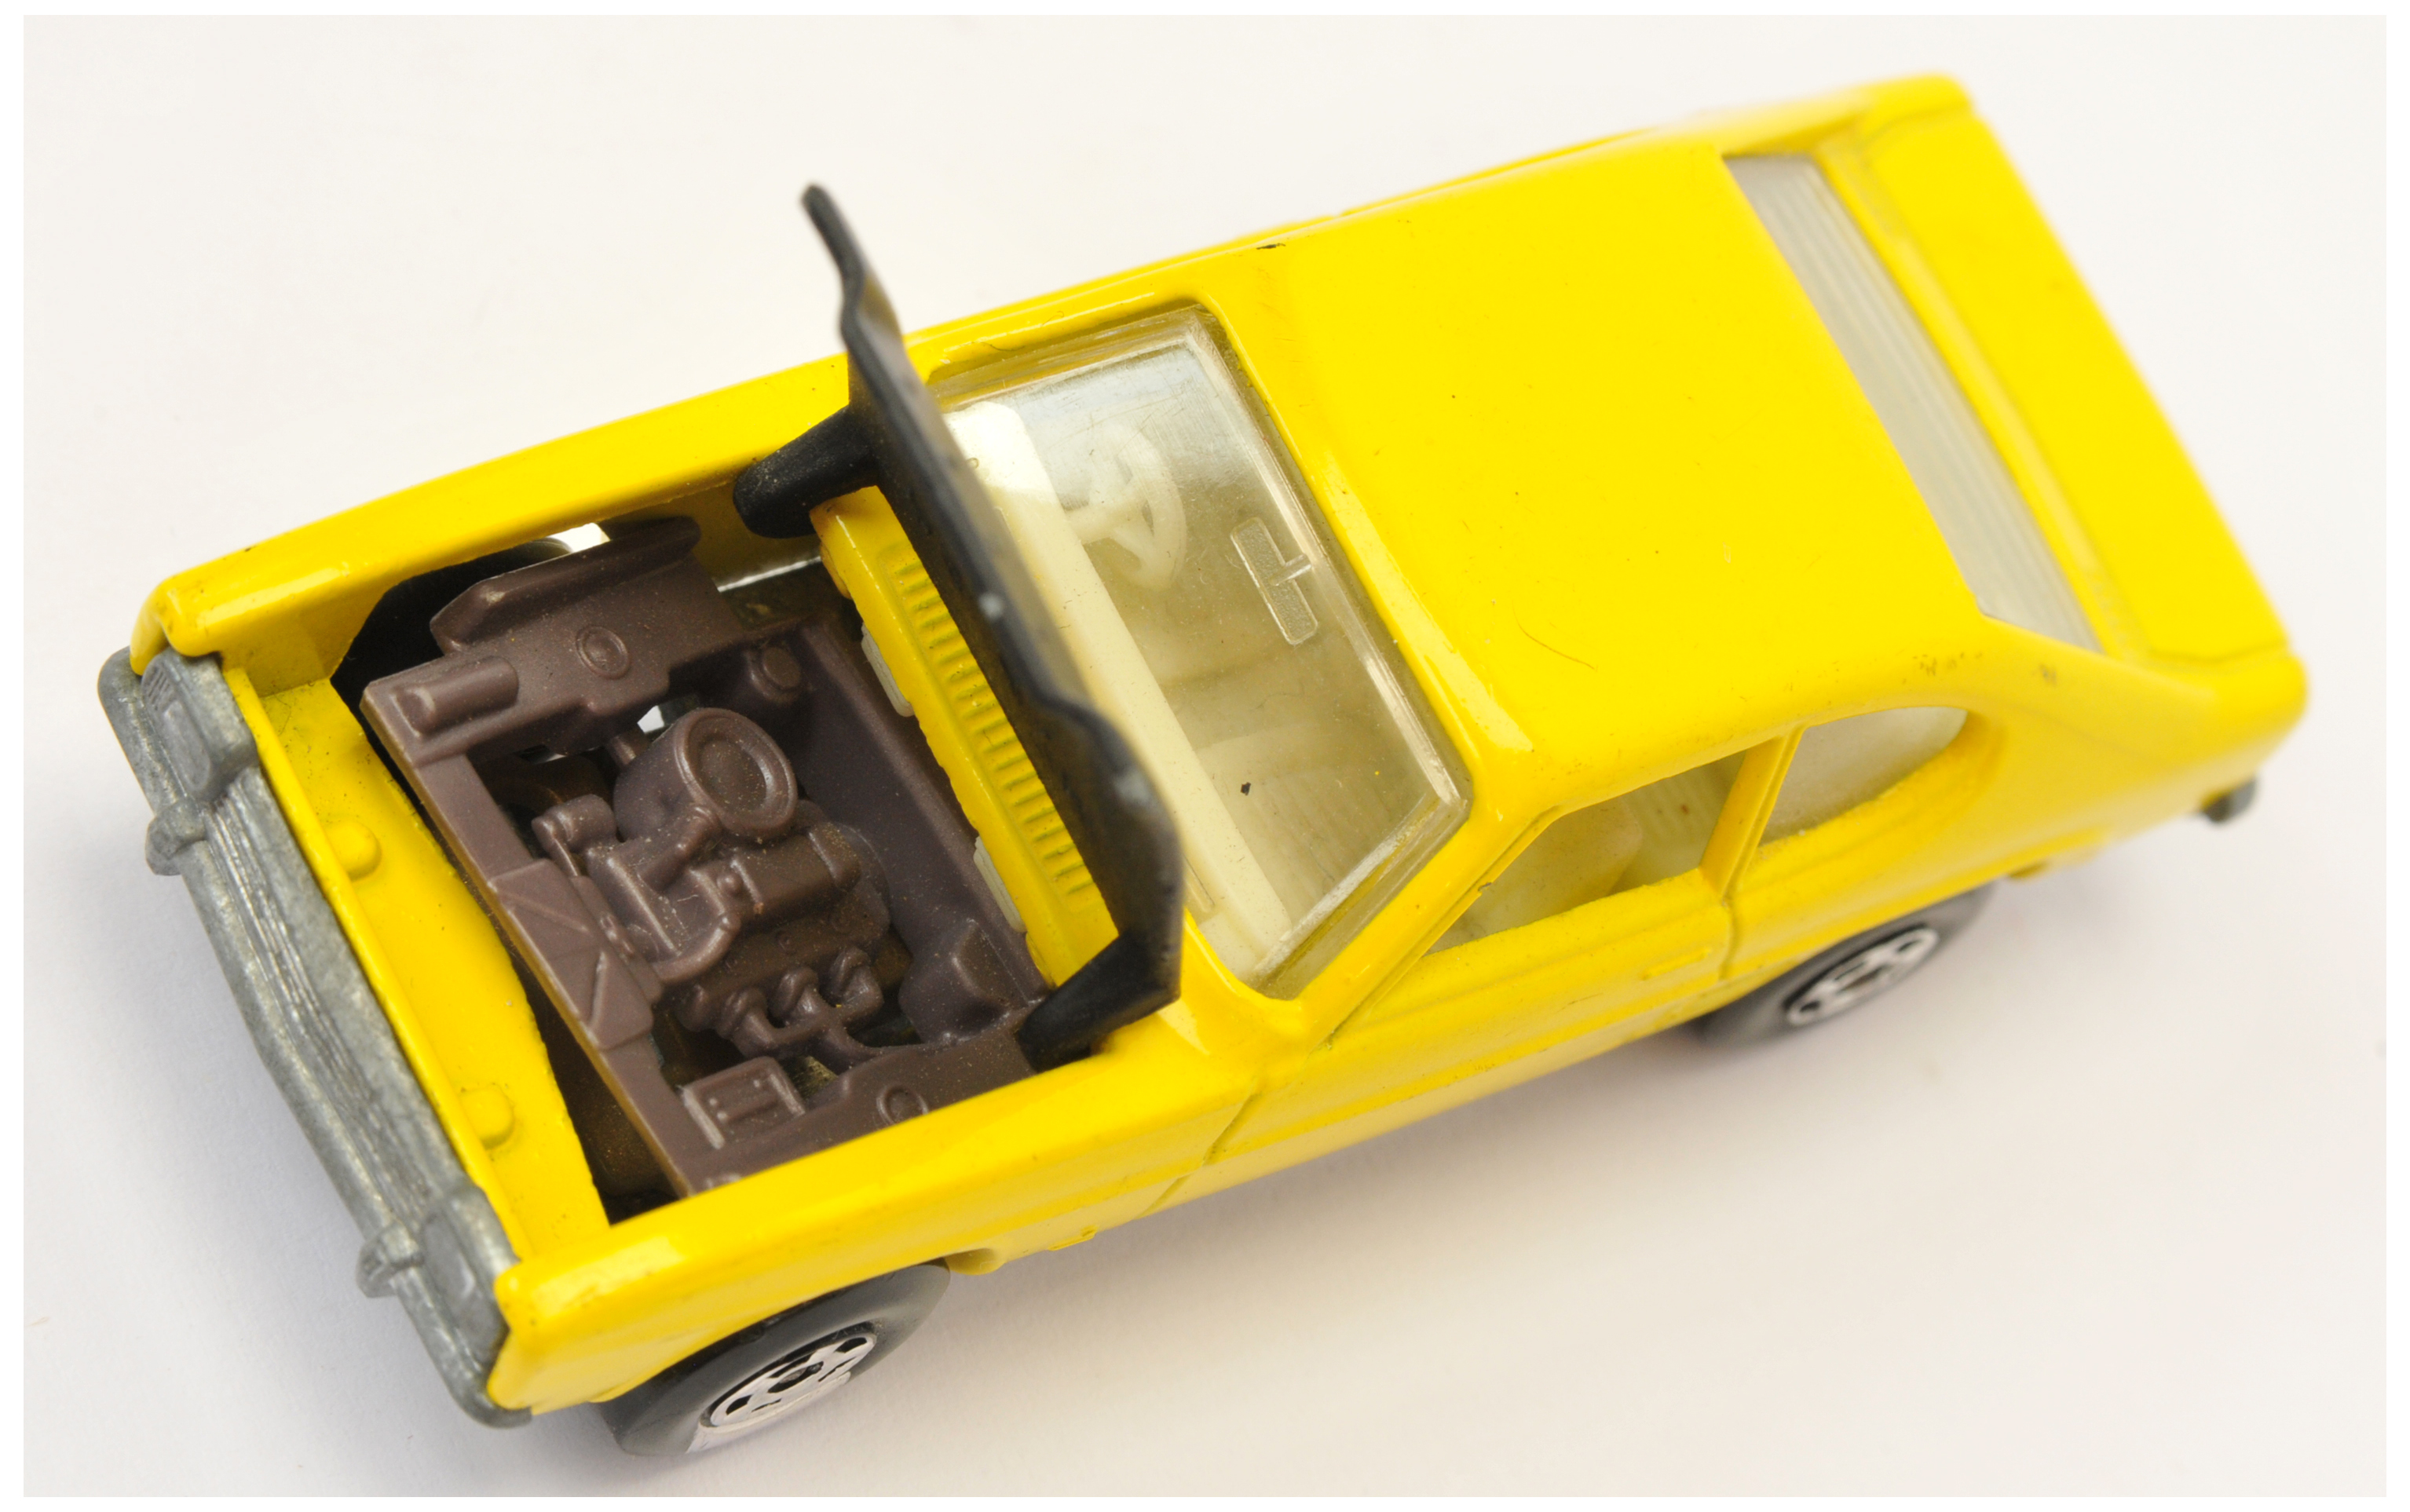 Matchbox Superfast 54b Ford Capri pre-production colour trial - lemon yellow body without flared ... - Image 4 of 4